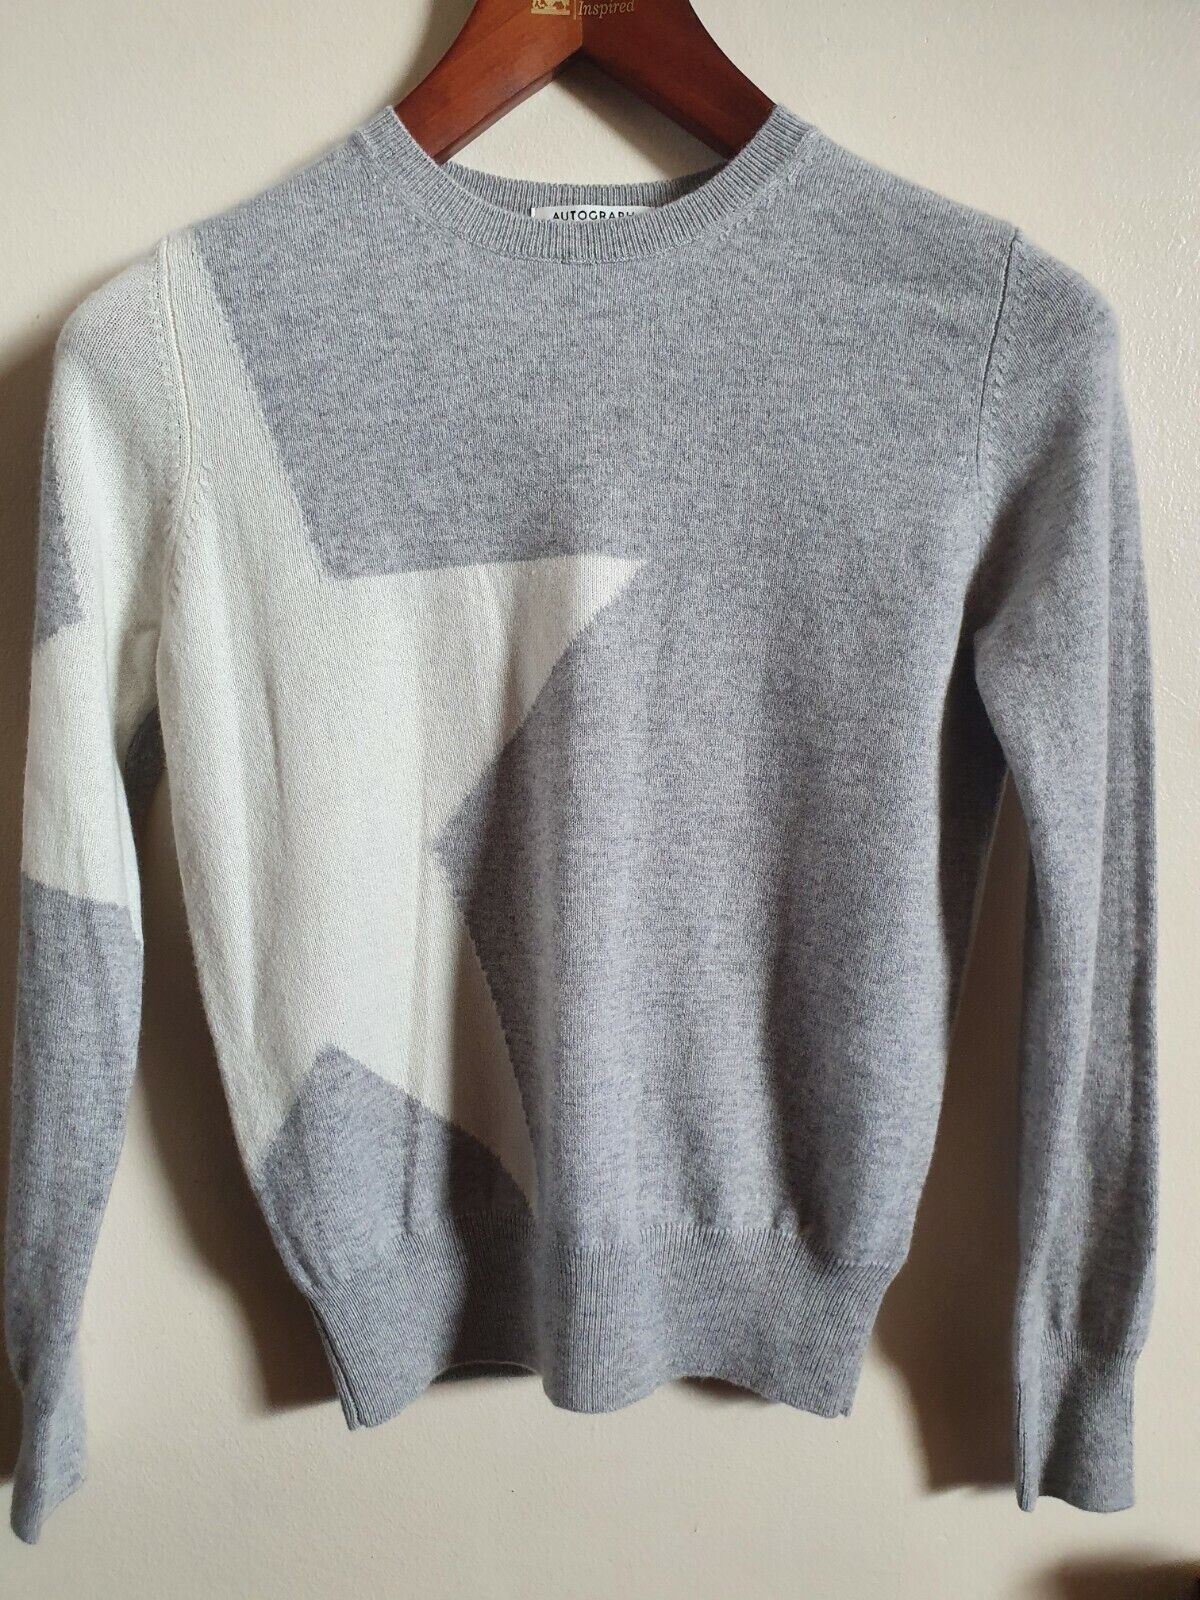 Marks and Spencer NEW Pure Cashmere Star Crew Neck Jumper size 8 Grey mix